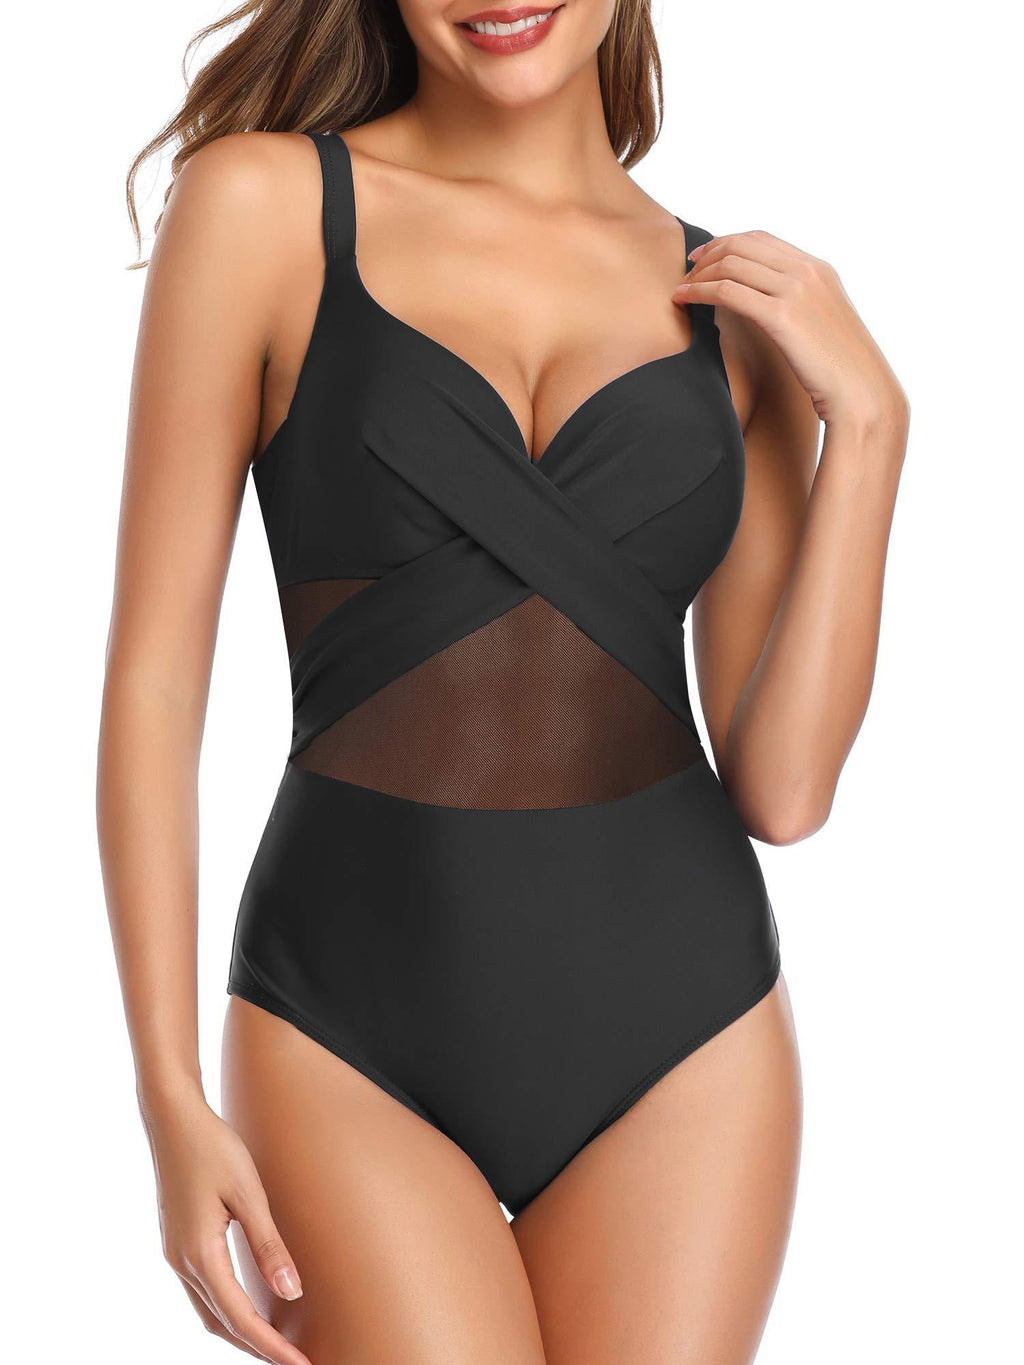 [AUSTRALIA] - FLYILY Women's One Piece Swimsuit Mesh See Through Monokini Tummy Control High Waisted Swimming Costume Swimwear Black With Underwired Pad 16-18 